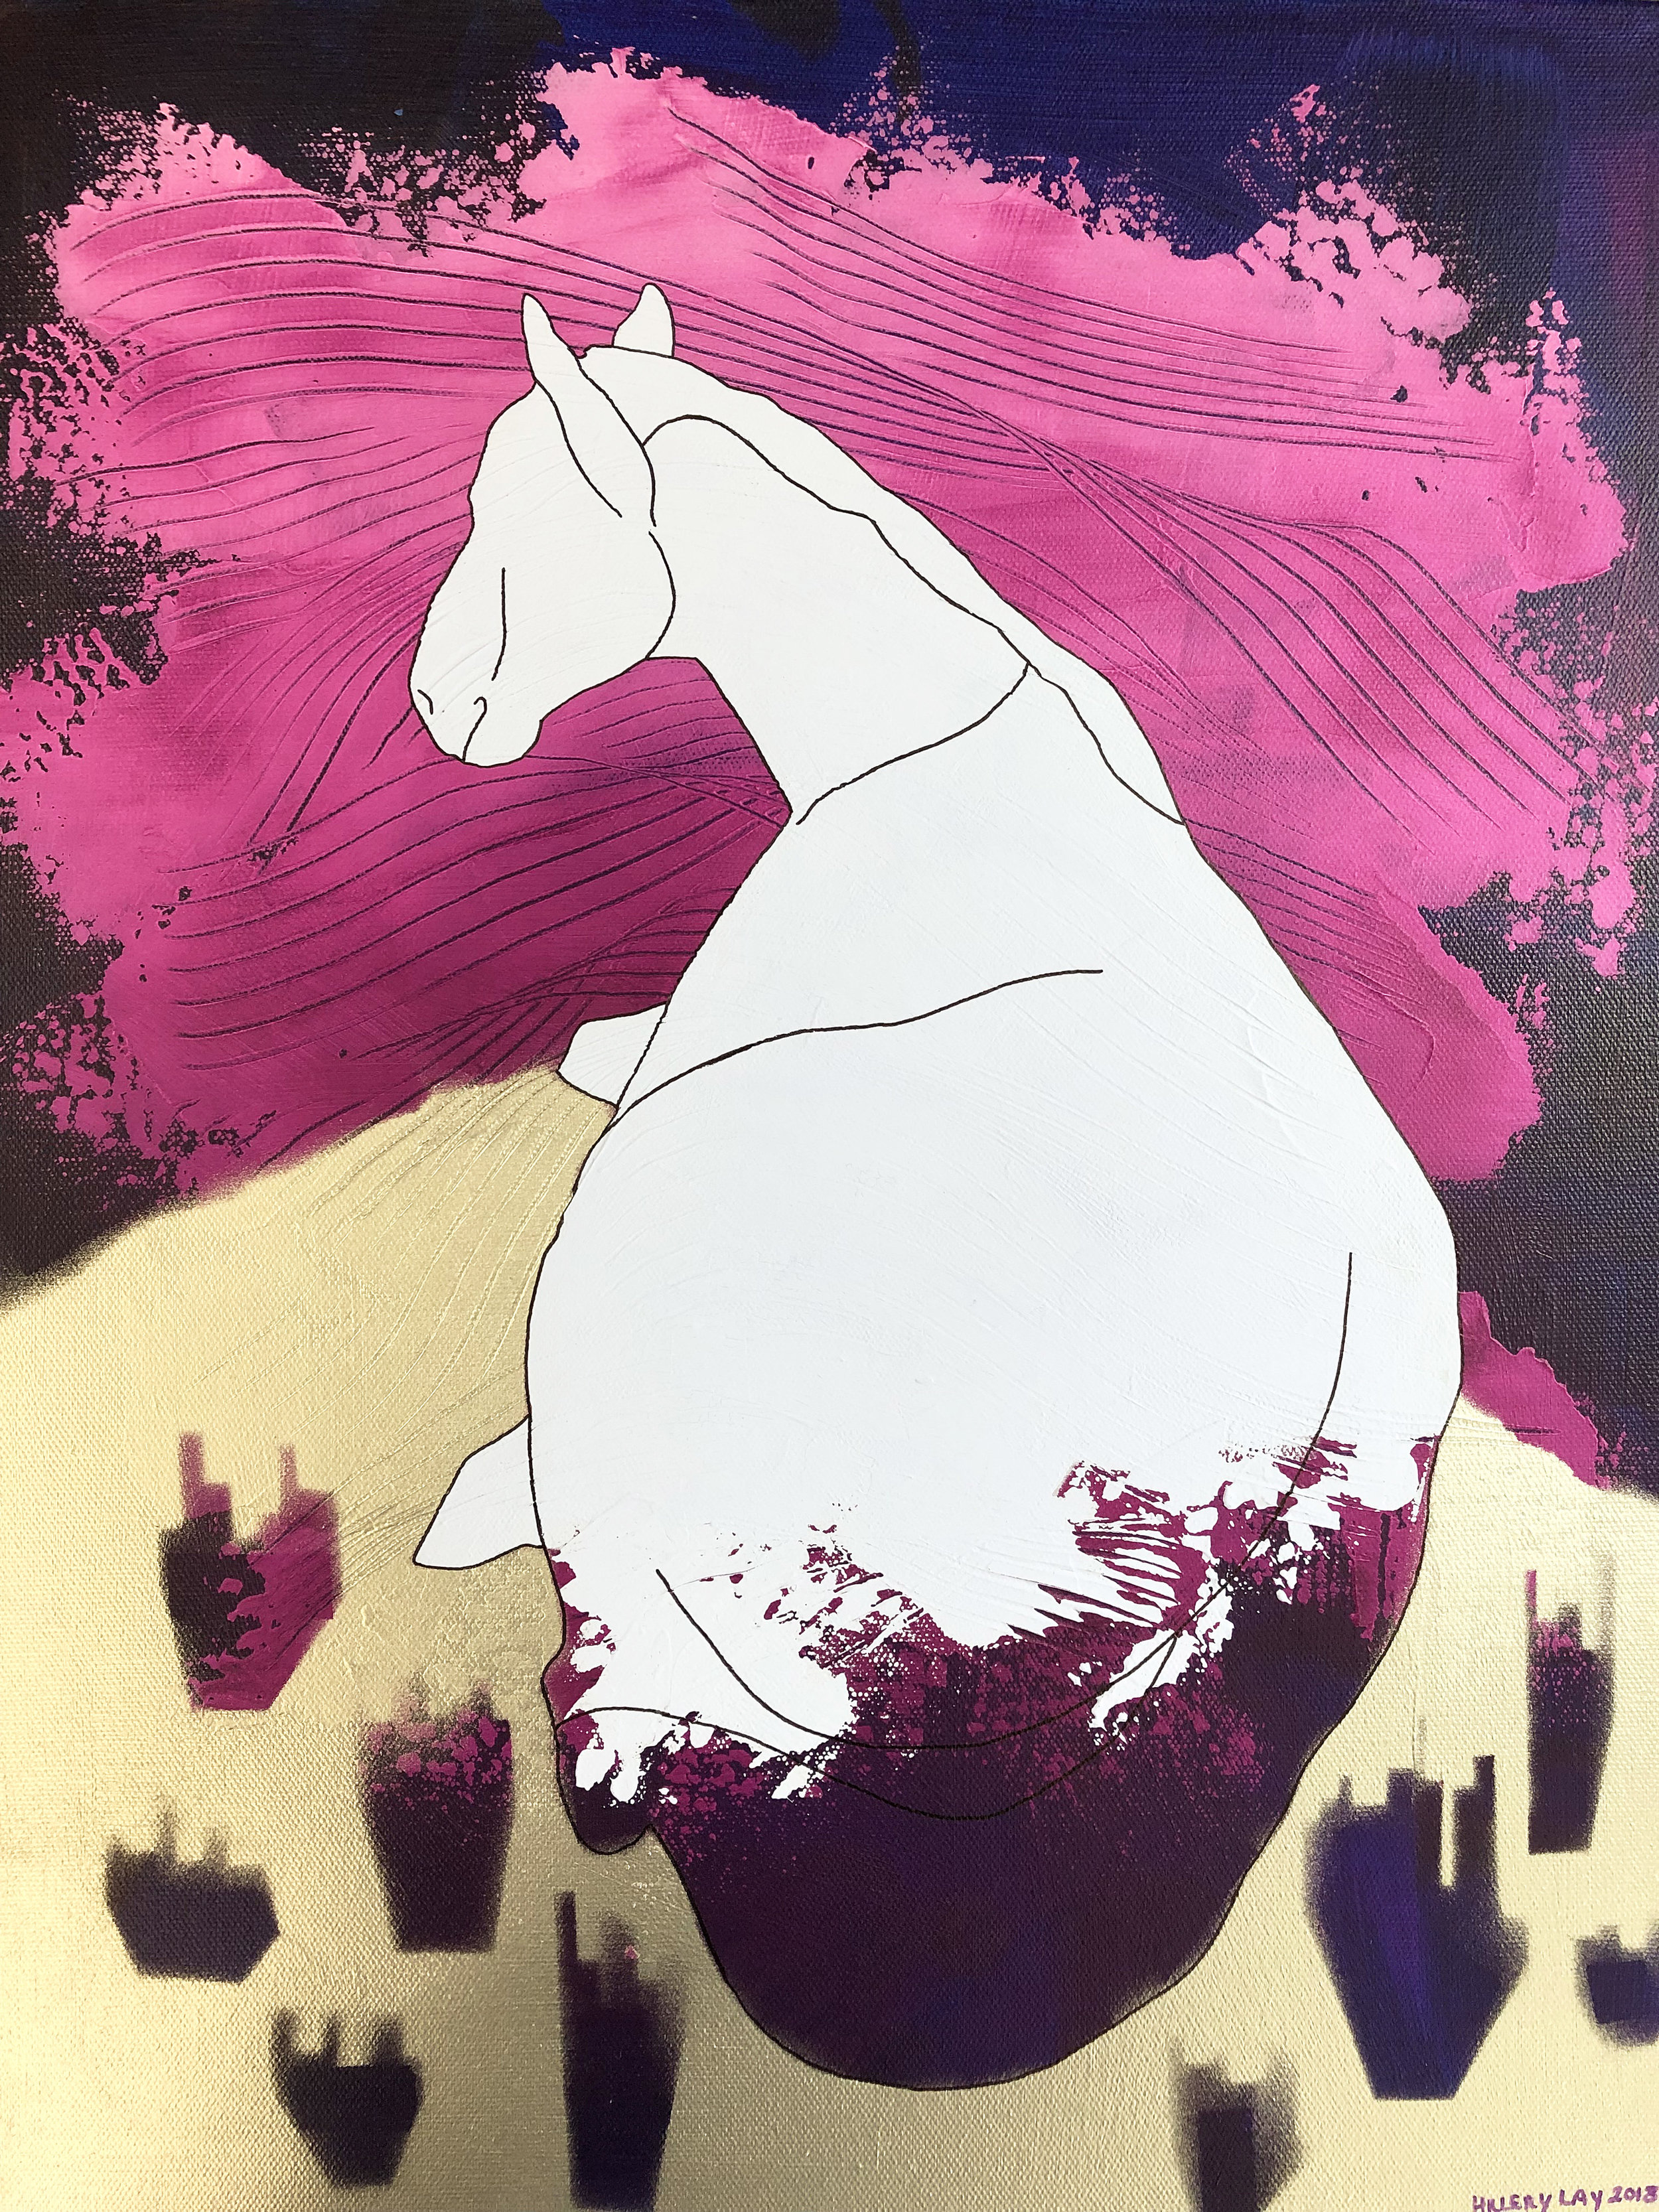 summit horse 2018 mm 16x20 inches